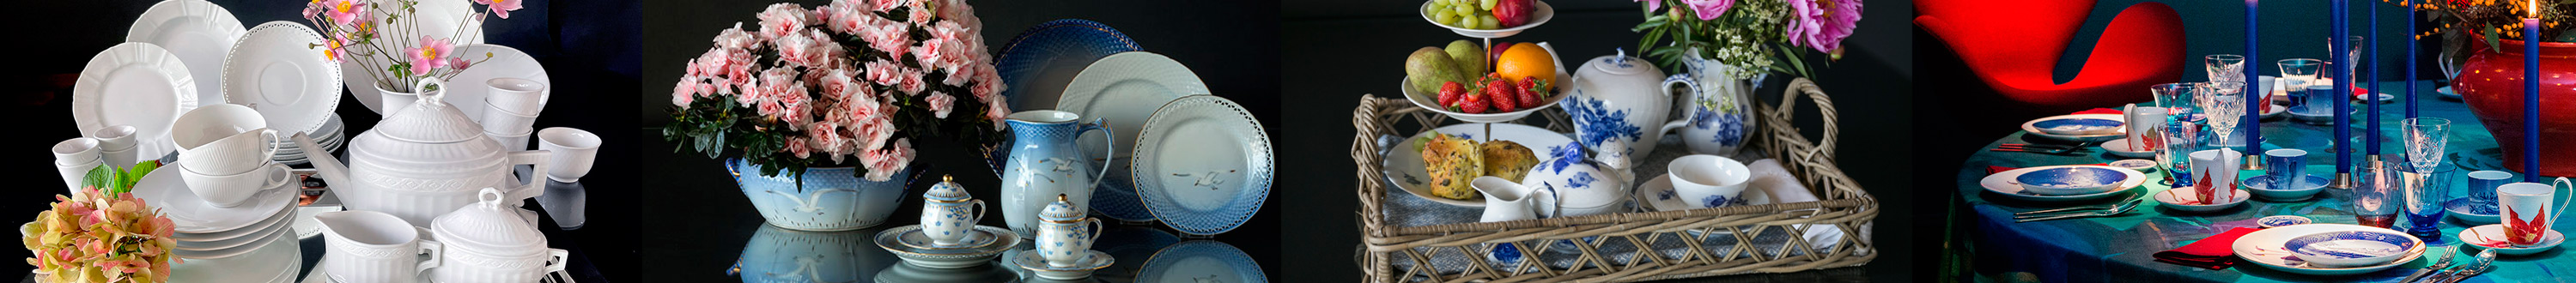 Tableware - Dinnerware - Coffee and Dinner Services - ON SALE